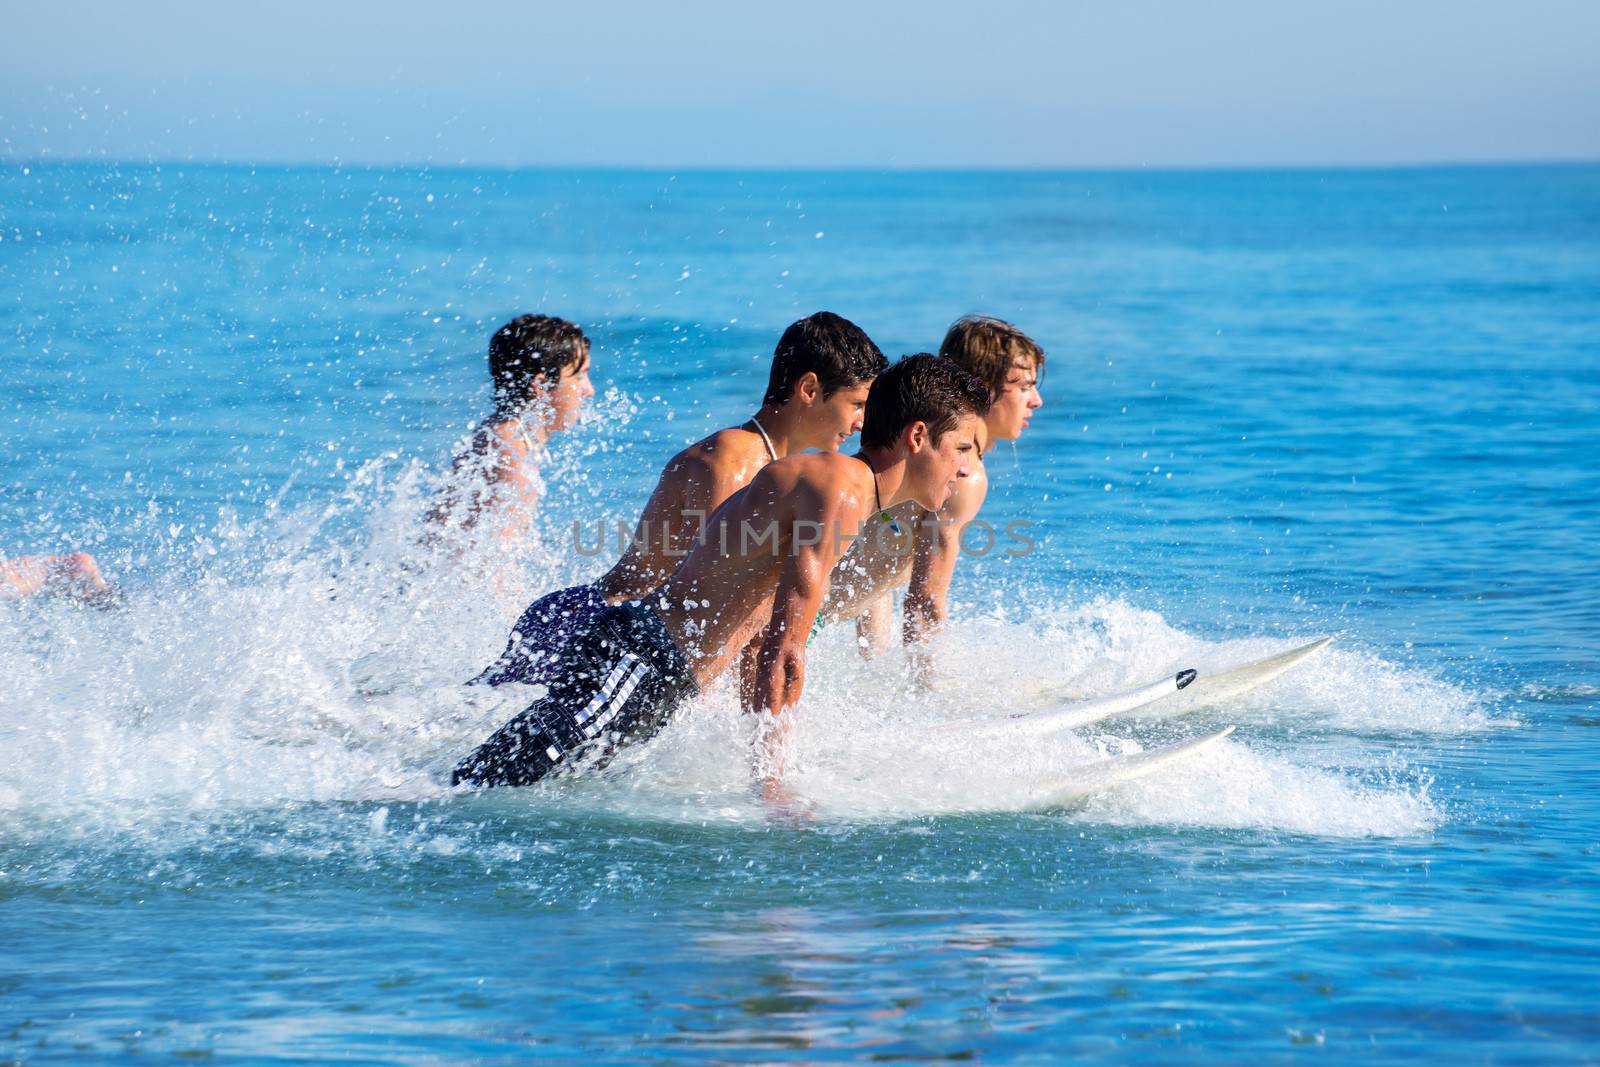 Boys teen surfers surfing running jumping on surfboards at the beach